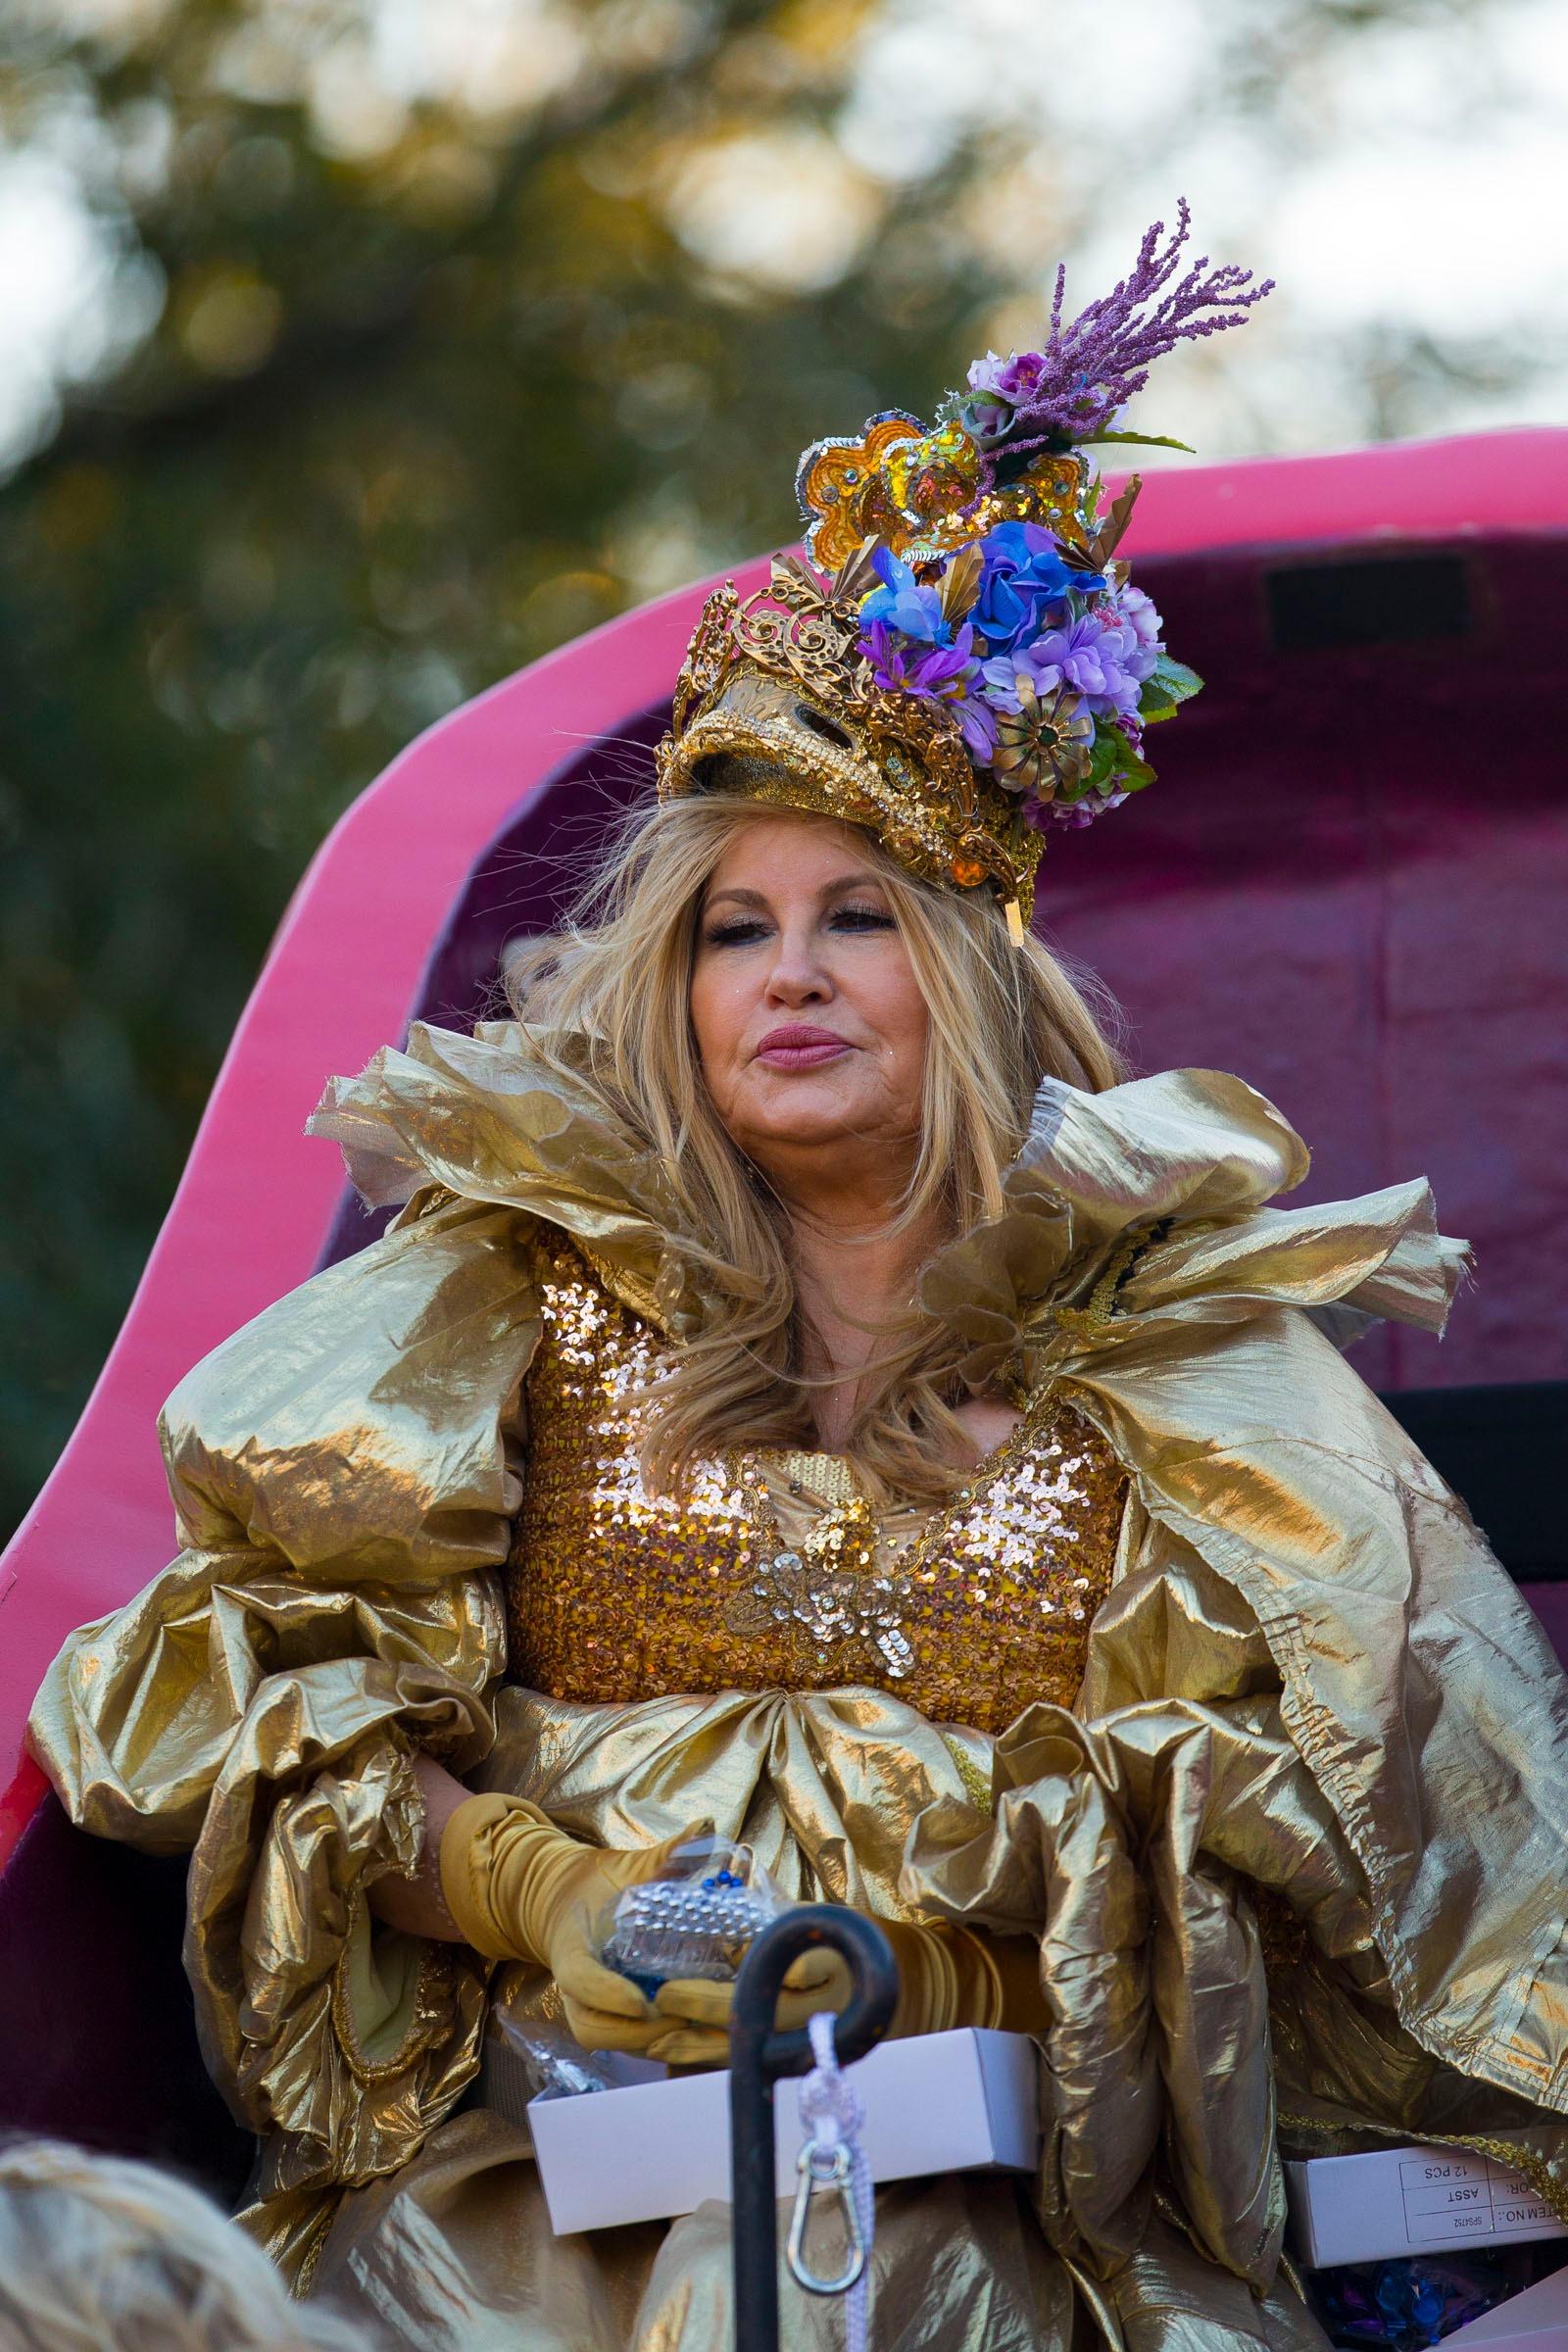 American Pie actress Jennifer Coolidge 58 rides in the giant shoe of apos Muses apos as part of the quot Krewe of Muses quot an all female parade during Mardi Gras